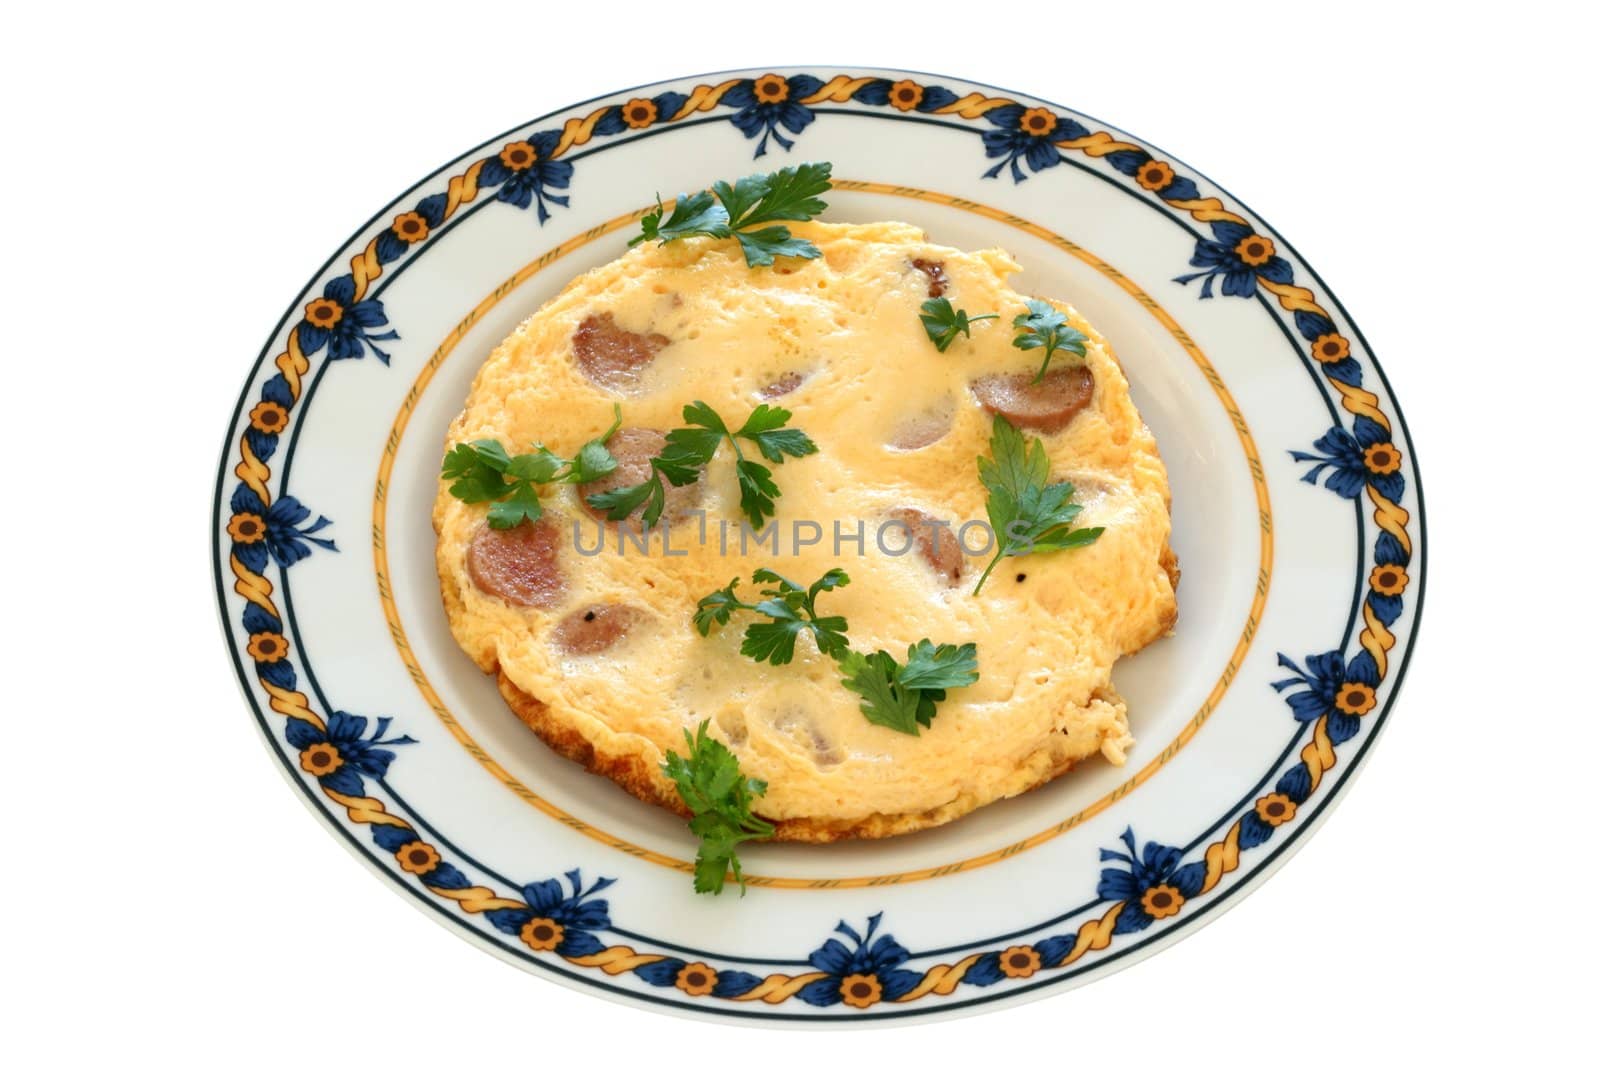 omelet with ham and parsley